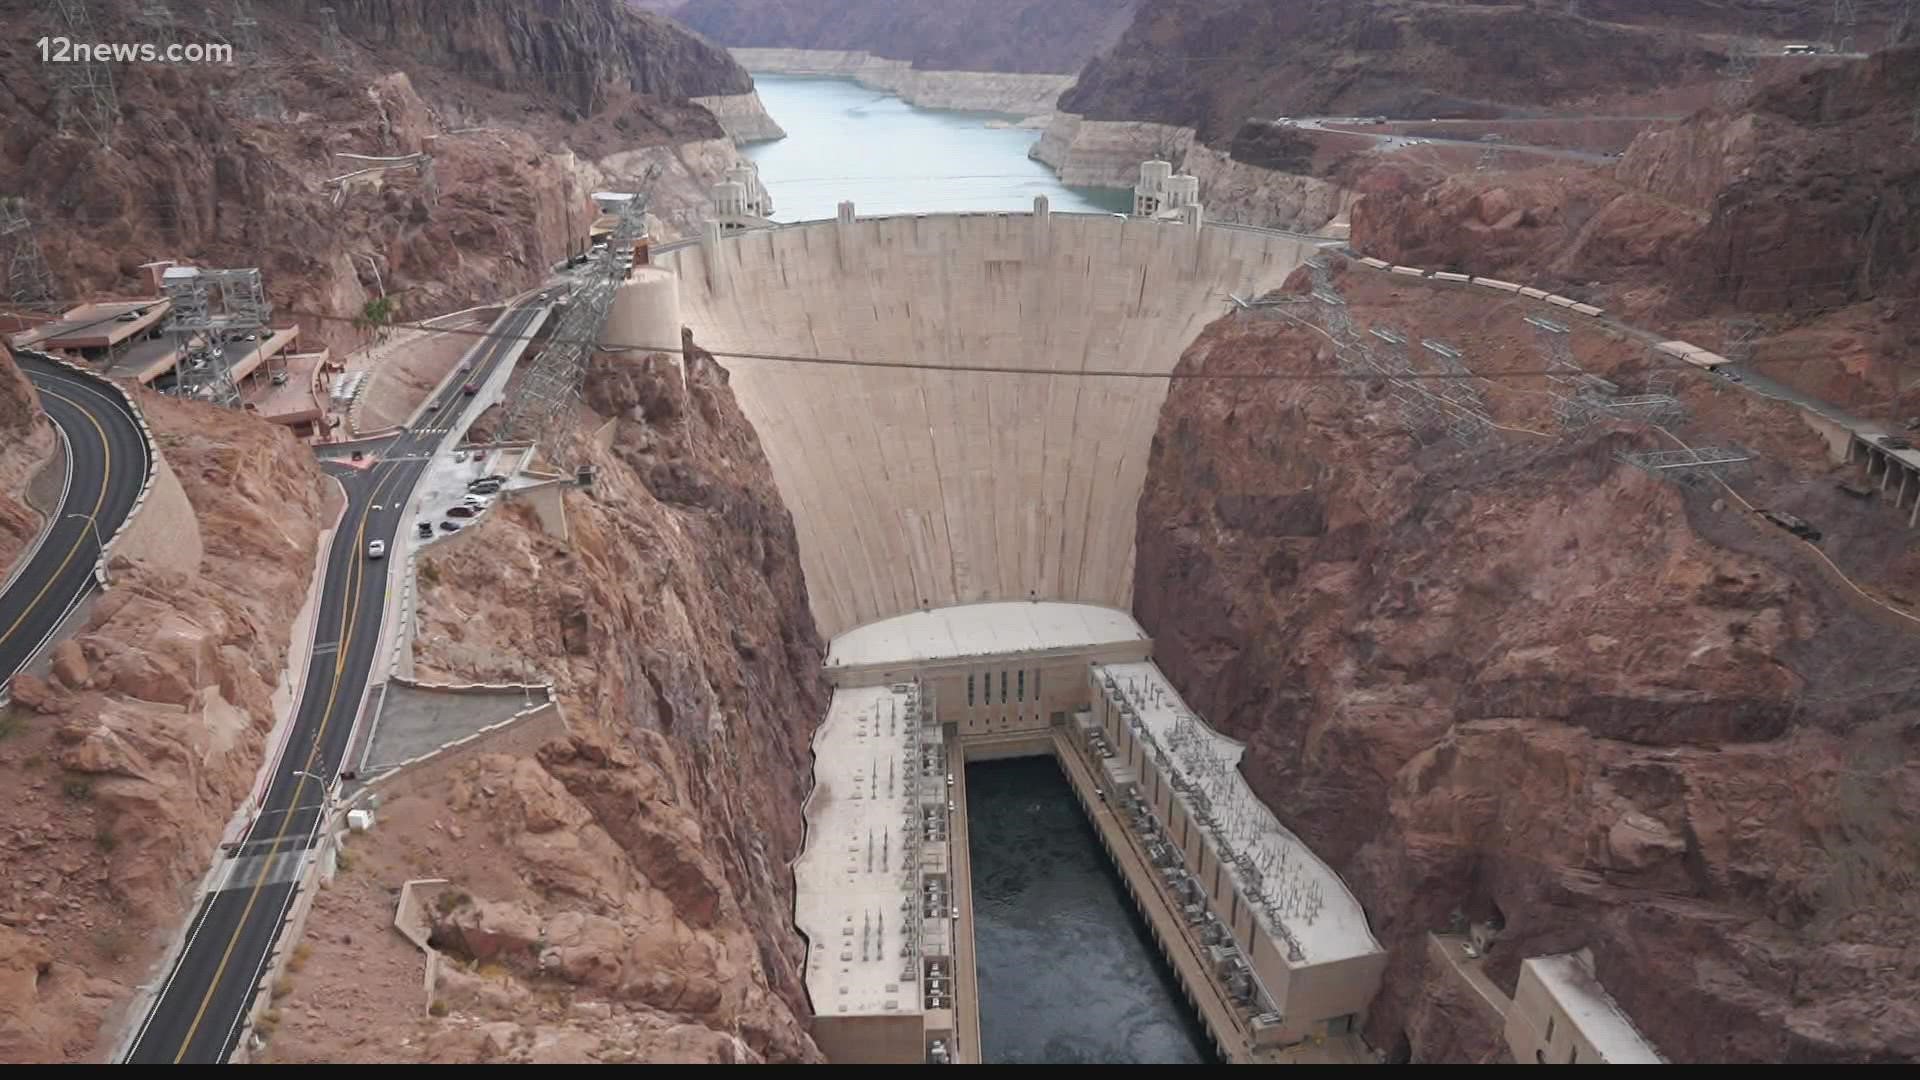 The water at Hoover Dam should be near the top of the dam. But the water hasn’t been that high in 40 years. Decades of drought have dropped the lake level 158 feet.